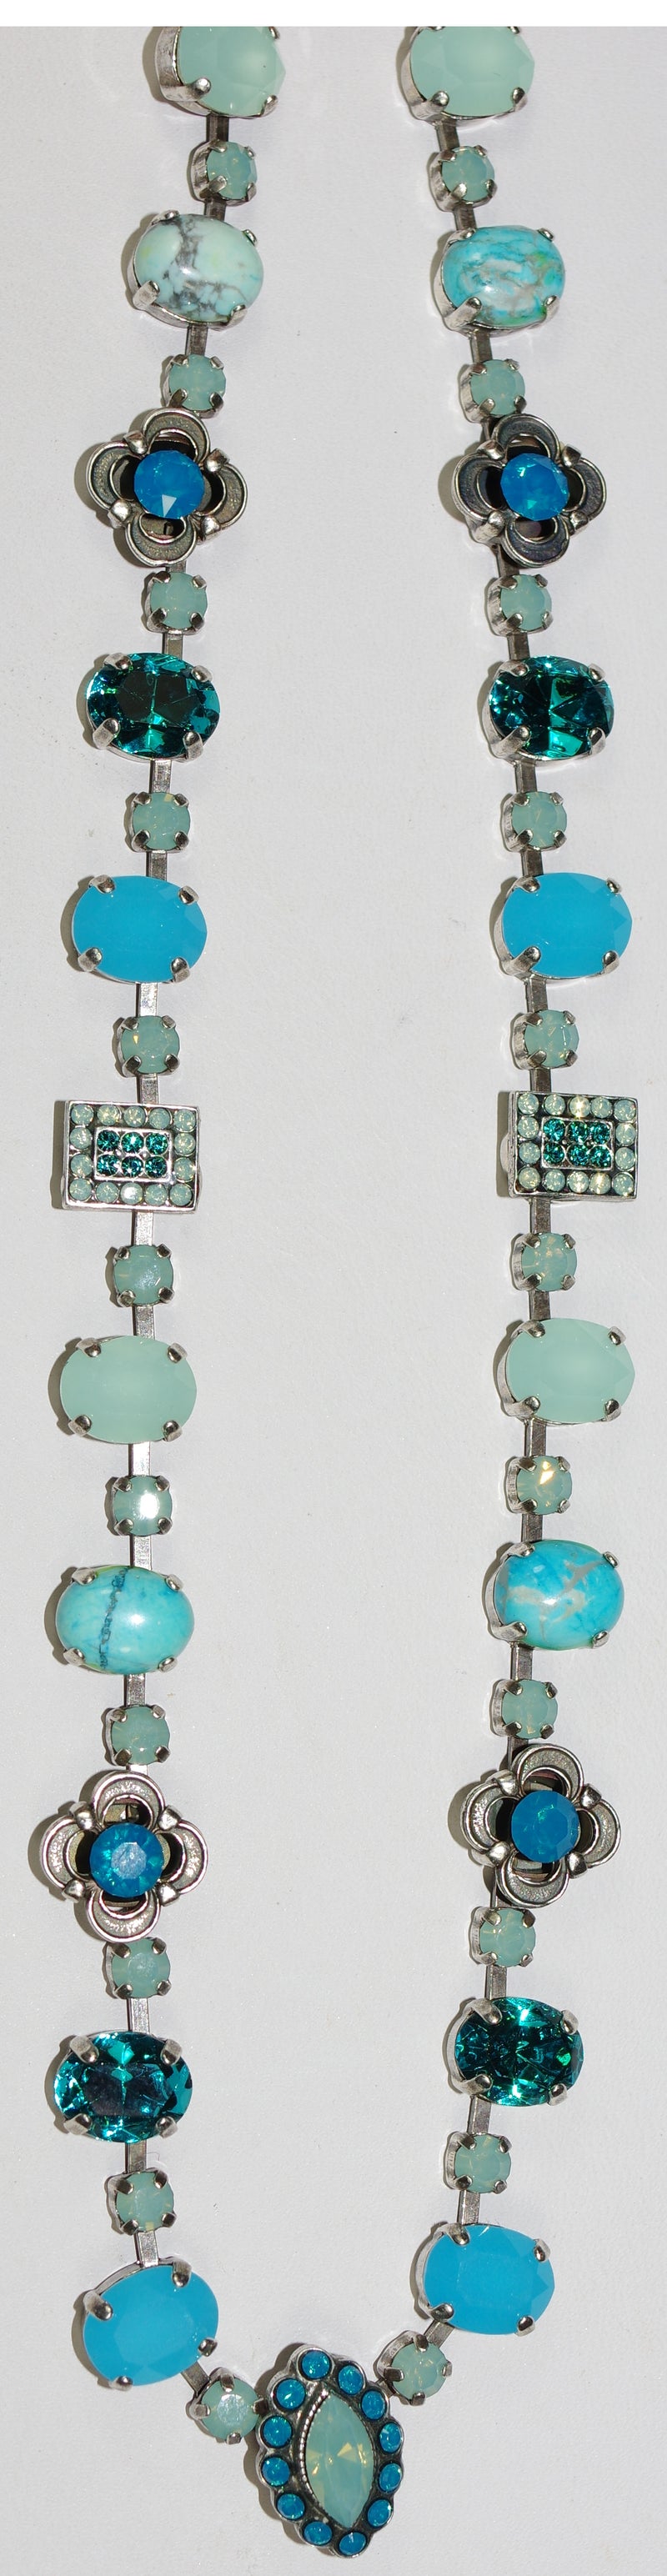 MARIANA NECKLACE BAHAMAS: pacific opal, teal, blue stones, silver setting, 20" adjustable chain